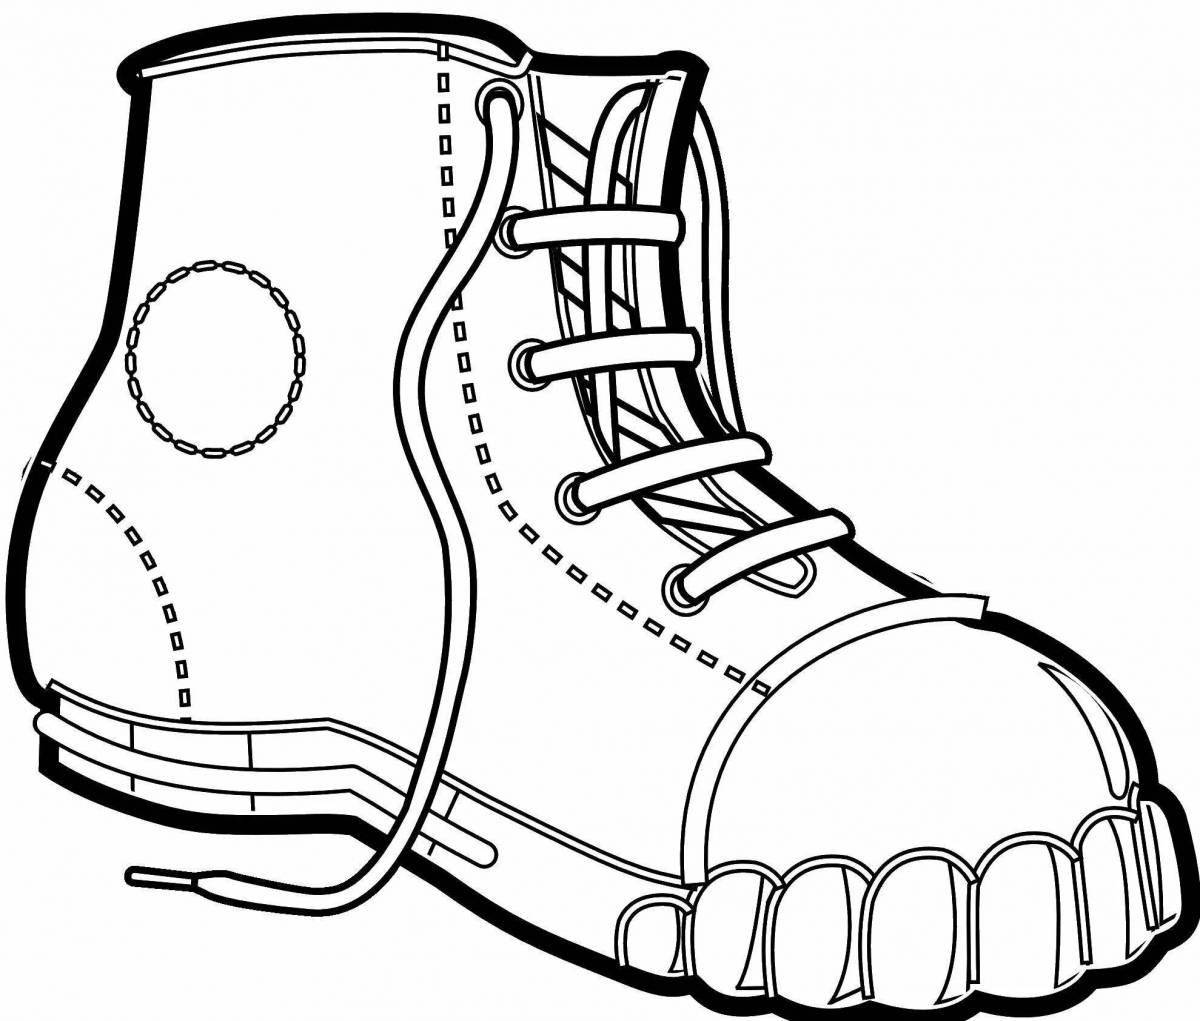 Shiny winter shoes coloring book for children